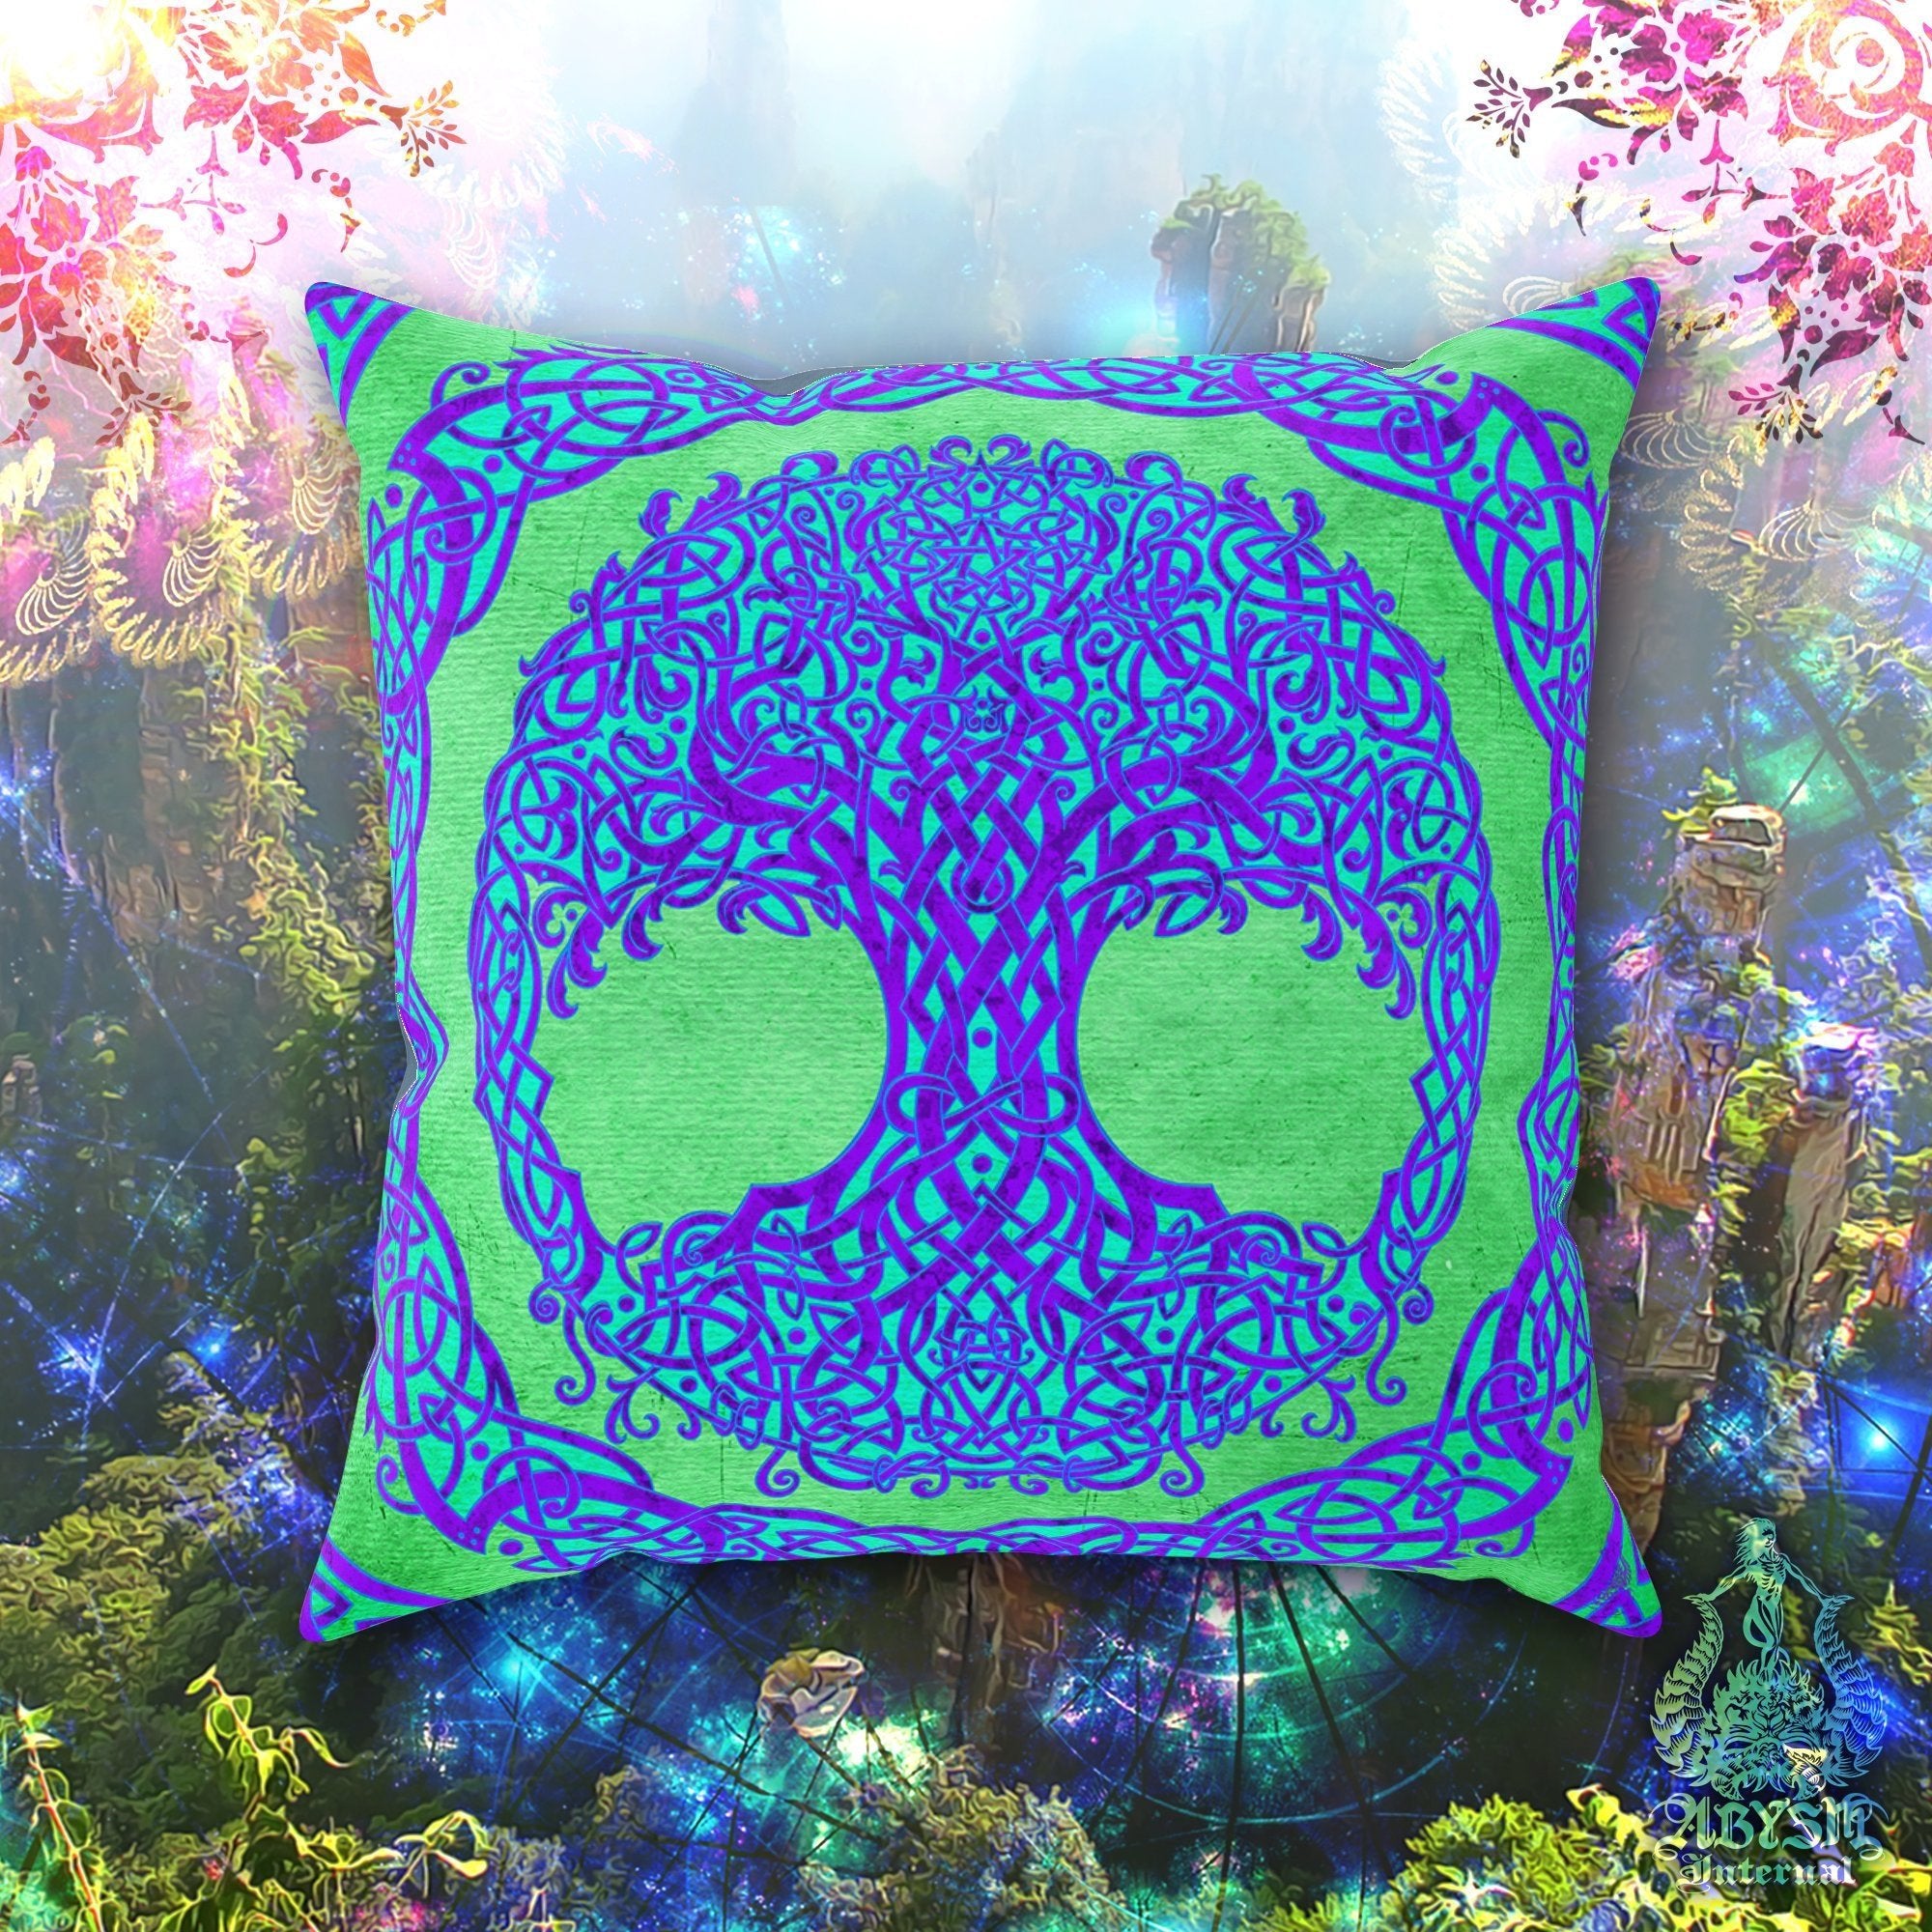 Tree of Life Throw Pillow, Decorative Accent Cushion, Wicca, Pagan Room Decor, Witchy Art, Celtic Knot, Funky and Eclectic Home - Psy - Abysm Internal